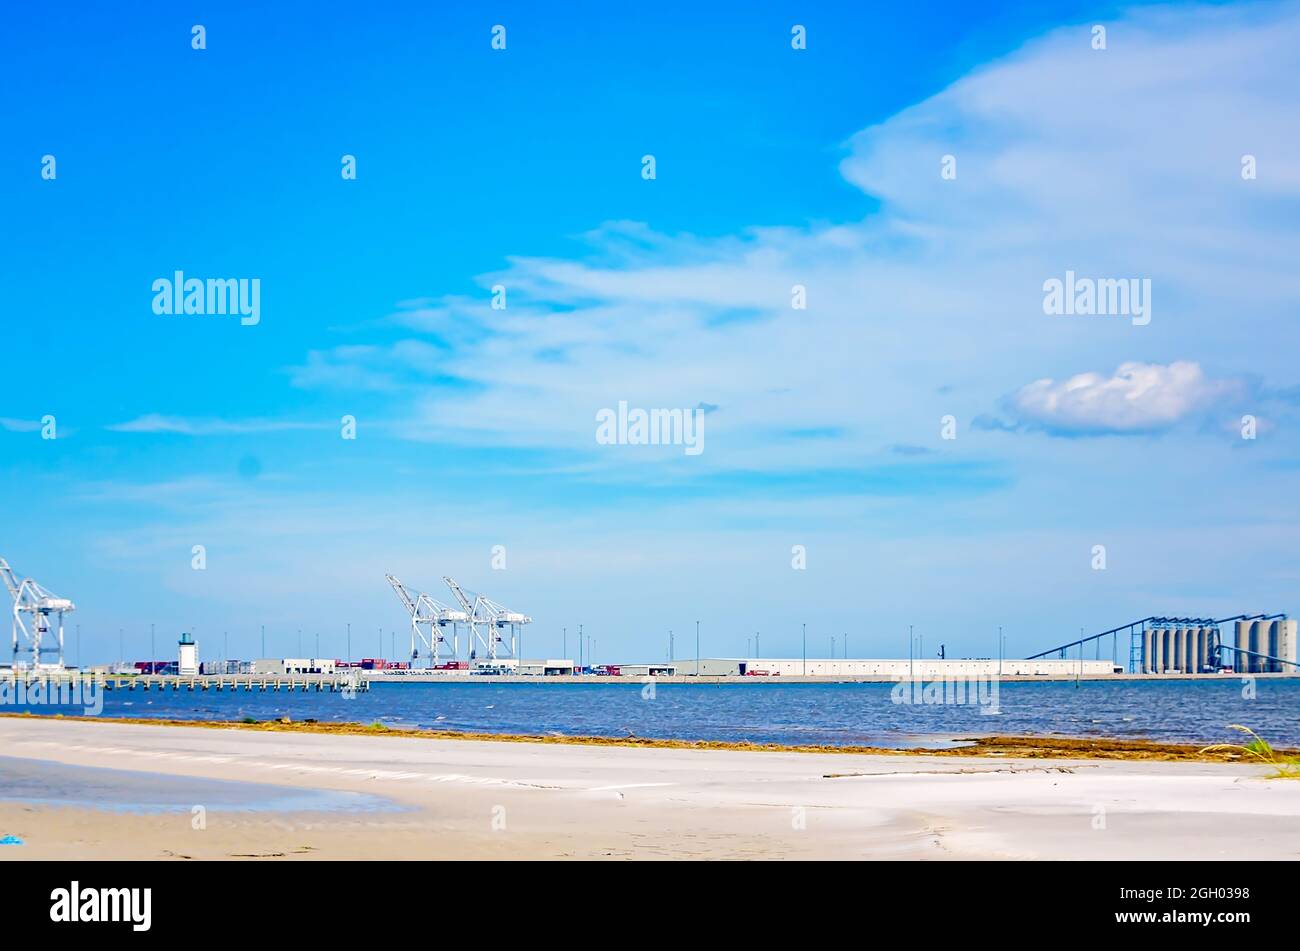 The Port of Gulfport is viewed from Gulfport Beach, Aug. 31, 2021, in Gulfport, Mississippi. Stock Photo